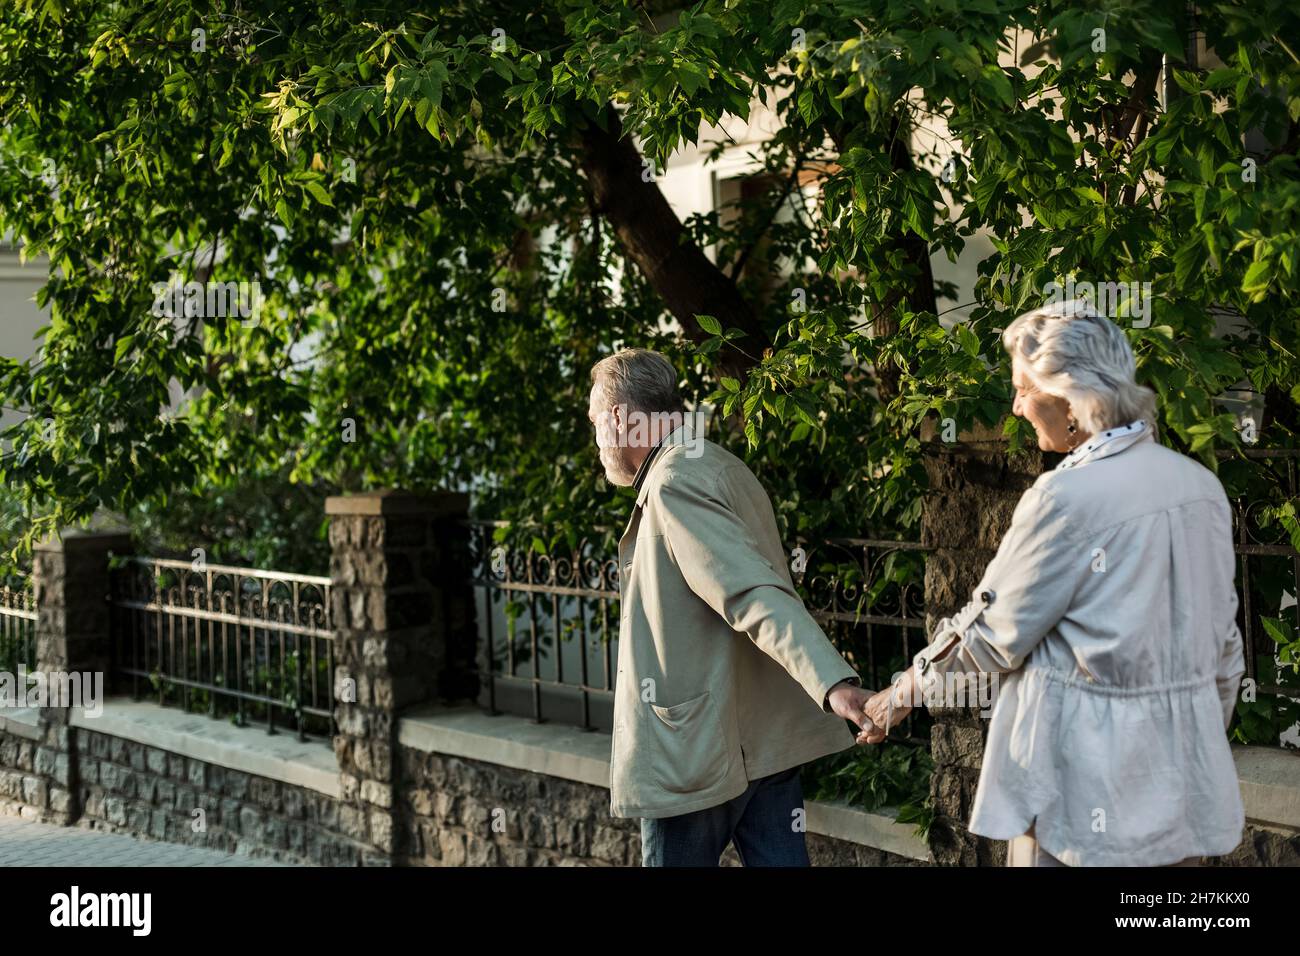 Couple holding hands while walking by tree Stock Photo